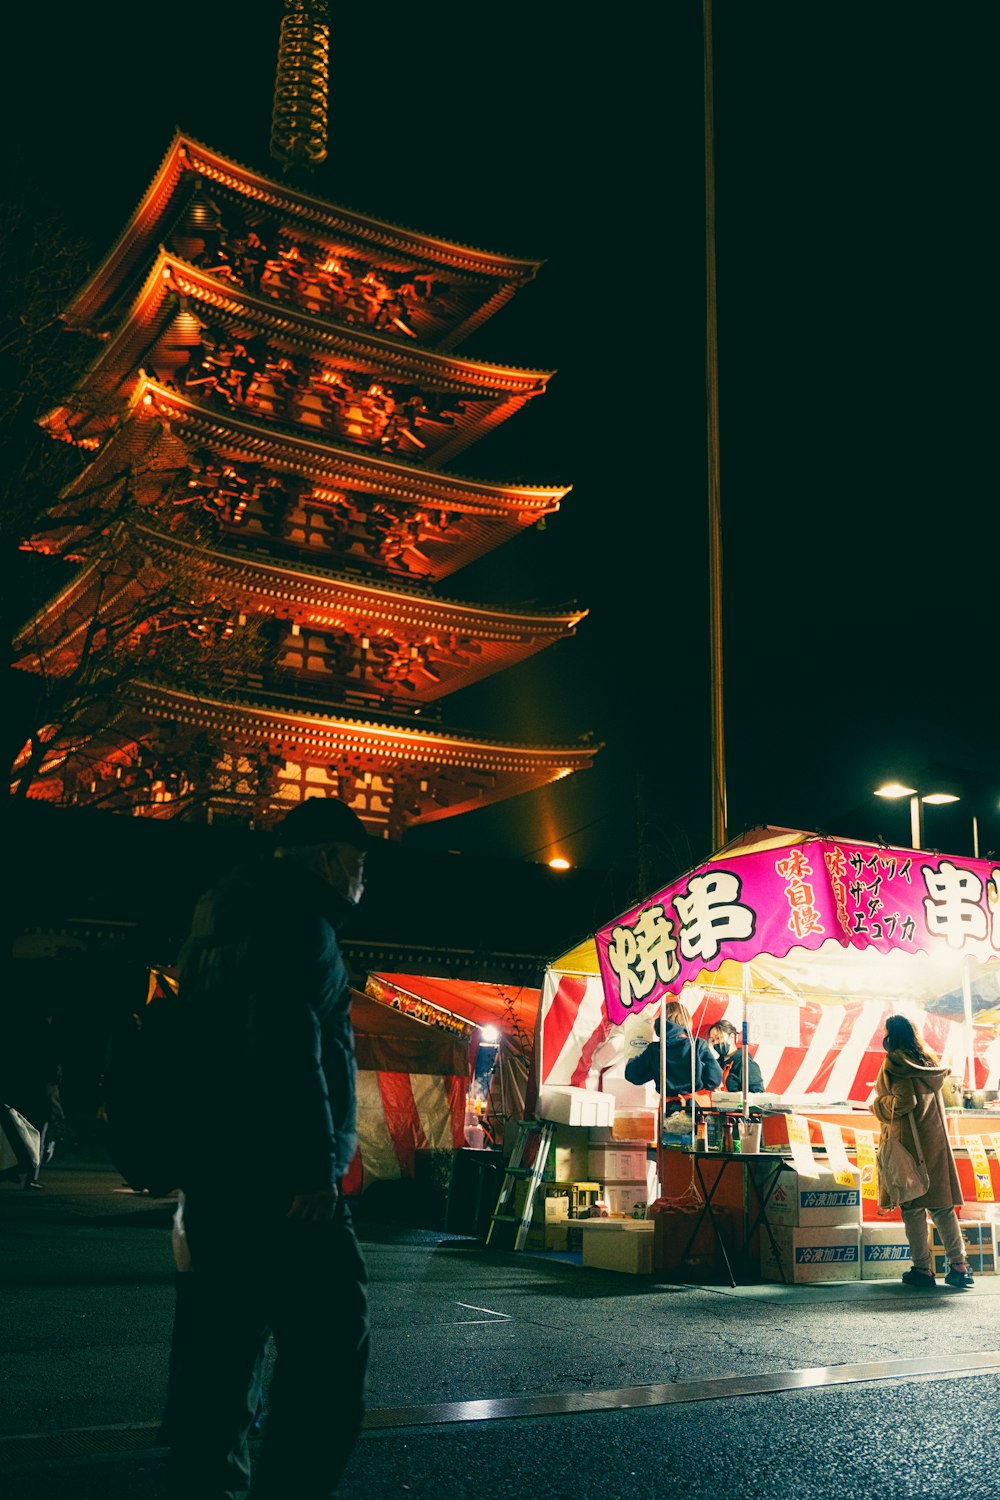 a fairground with people standing around it at night